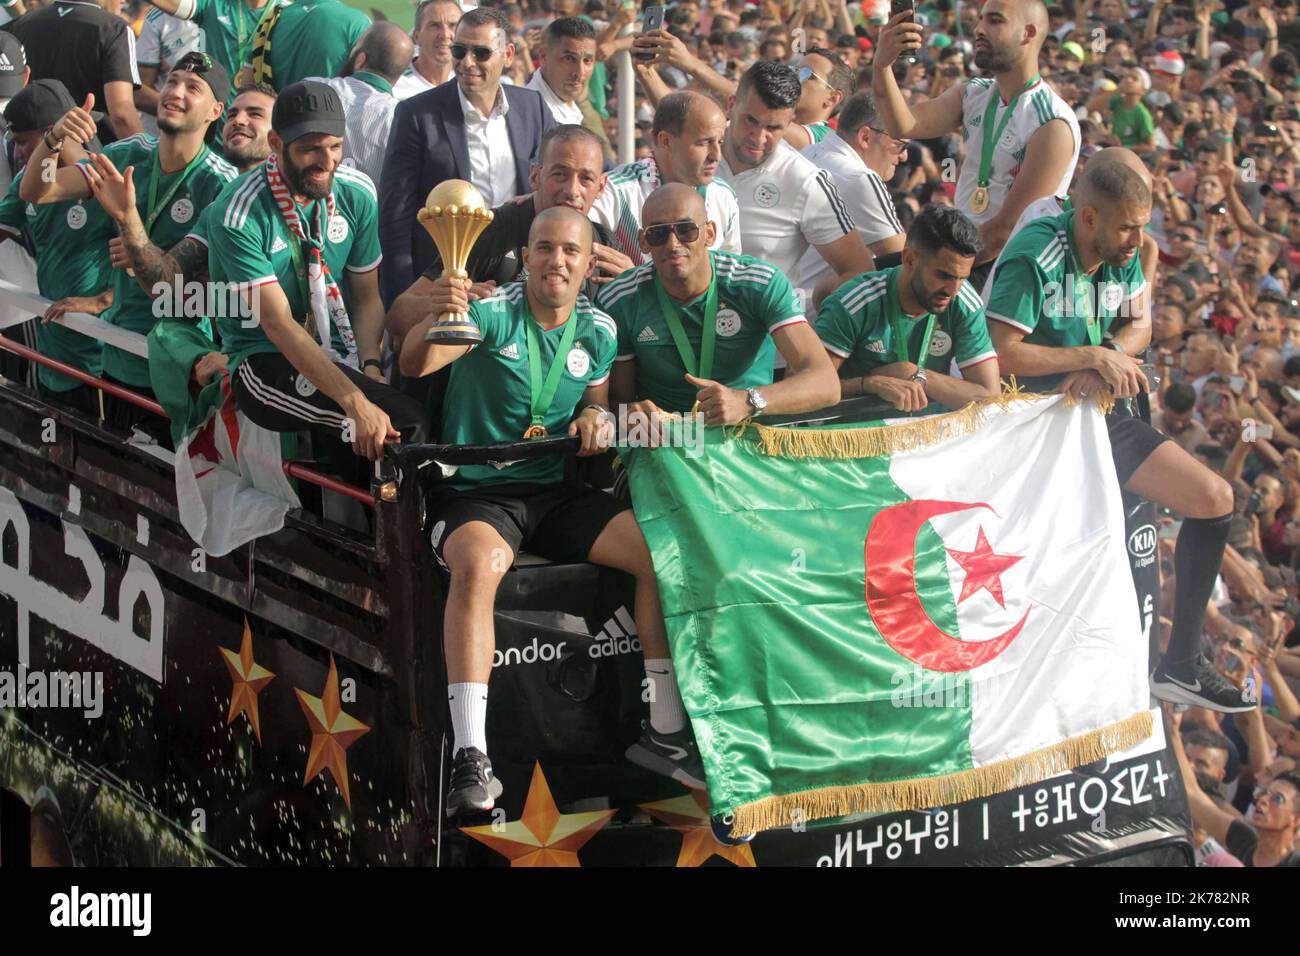 Algerians supporters in Algiers the capital of Algeria to welcome the Algerian national team following their victory in the 2019 Africa Cup of Nations Stock Photo